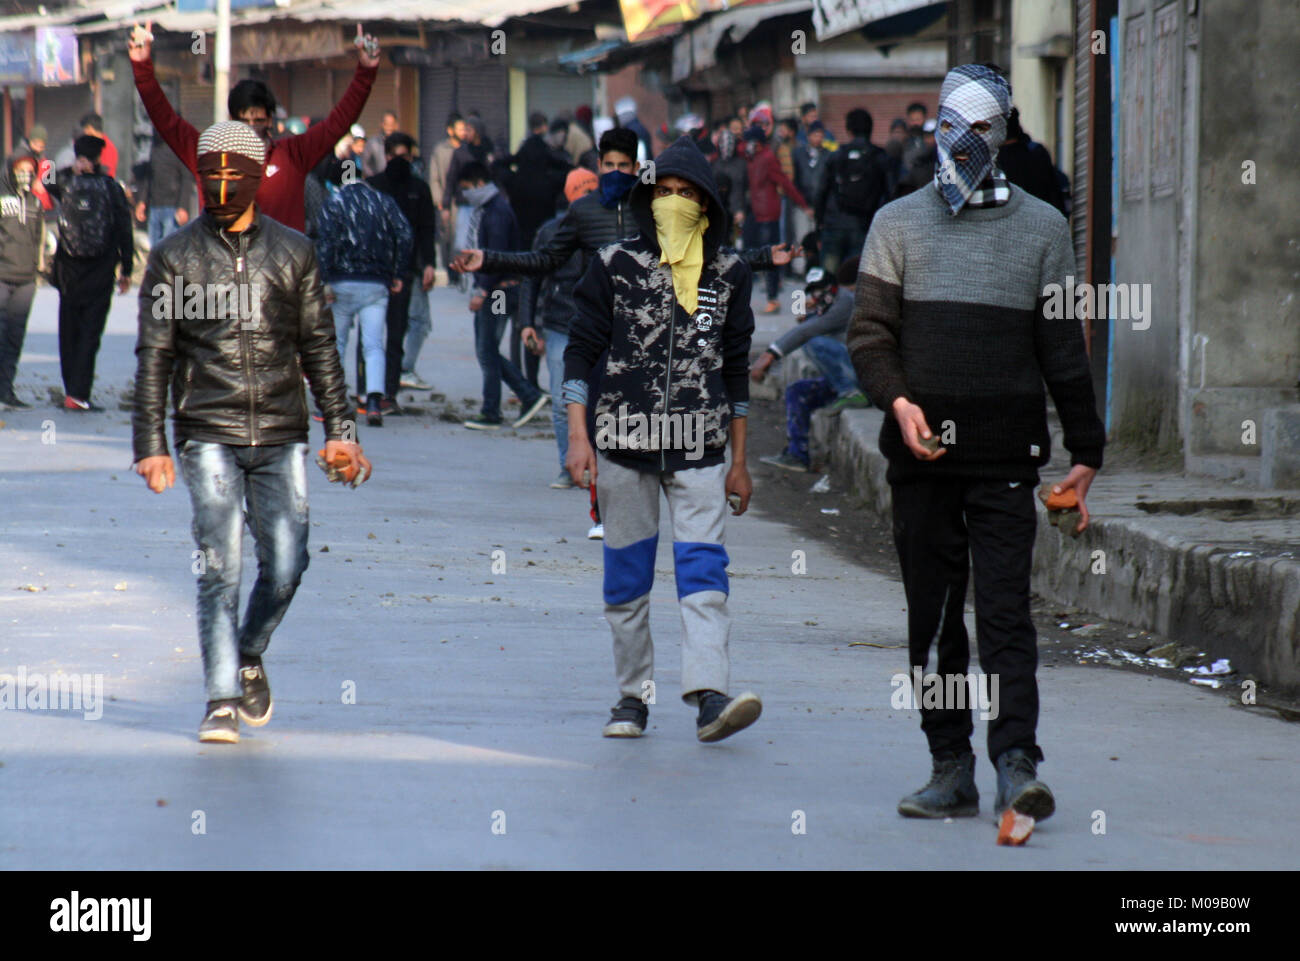 Srinagar.KASHMIR19. JANUARY masked Kashmiri protester prepares to throw stones at Indian police during a protest after friday prayers Indian forces used tear gas and pellet guns to disperse hundreds of stone-throwing protesters who were protesting against National Investigation Agency (NIA) chargesheet.Hafiz Lashkar-e-Taiba (LeT) Hizb-ul-Mujahideen, Syed Salahuddin and 10 accused: 7 separatists, 1 businessman, 2 stone pelters . Credit: Sofi Suhail/Alamy Live News Stock Photo